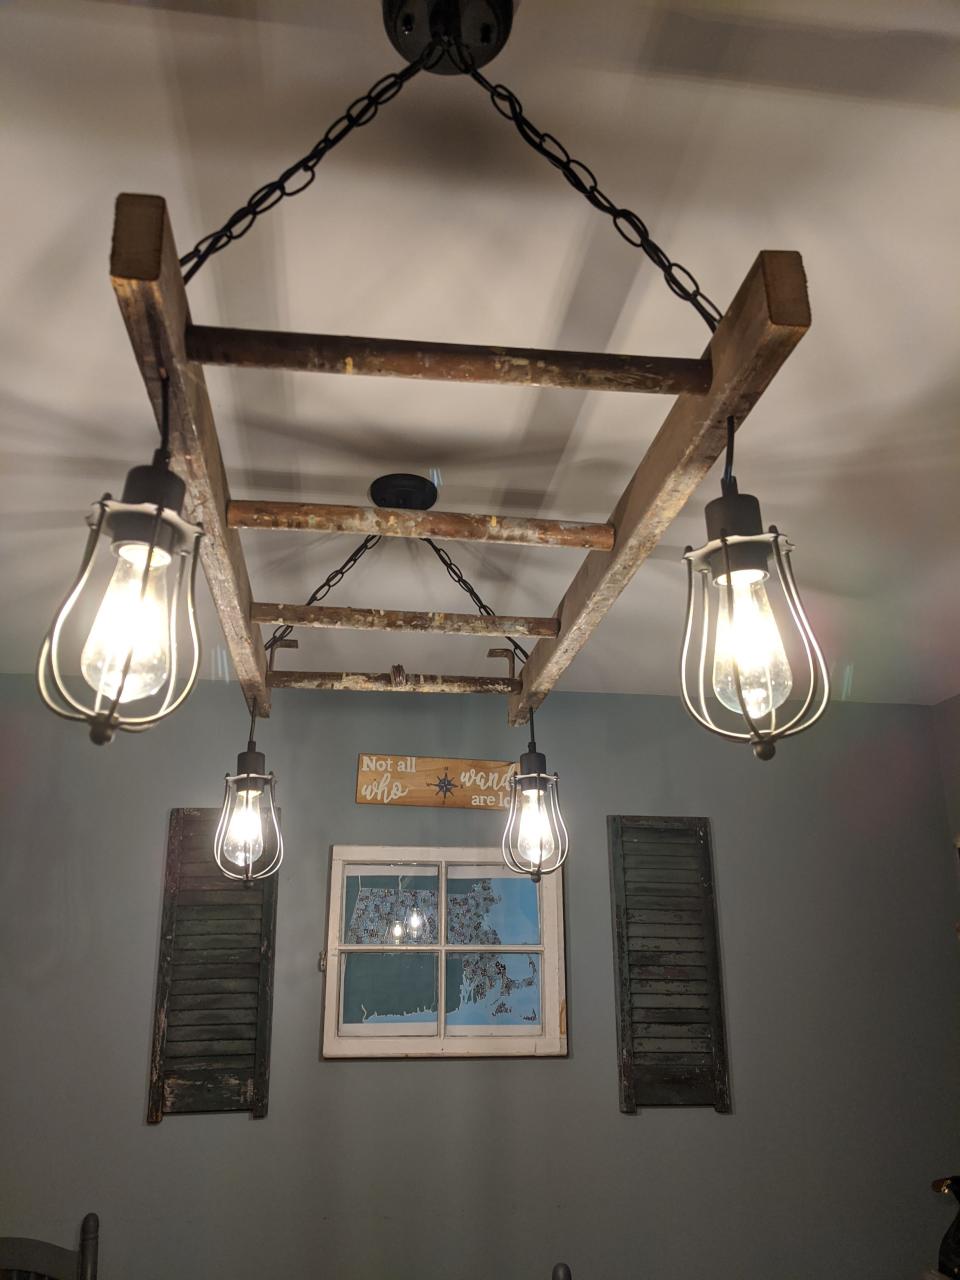 An old wooden ladder reimagined as a lighting fixture by Berkley residents Kim and Dan Arena, owners of Bostonian Repurposed.